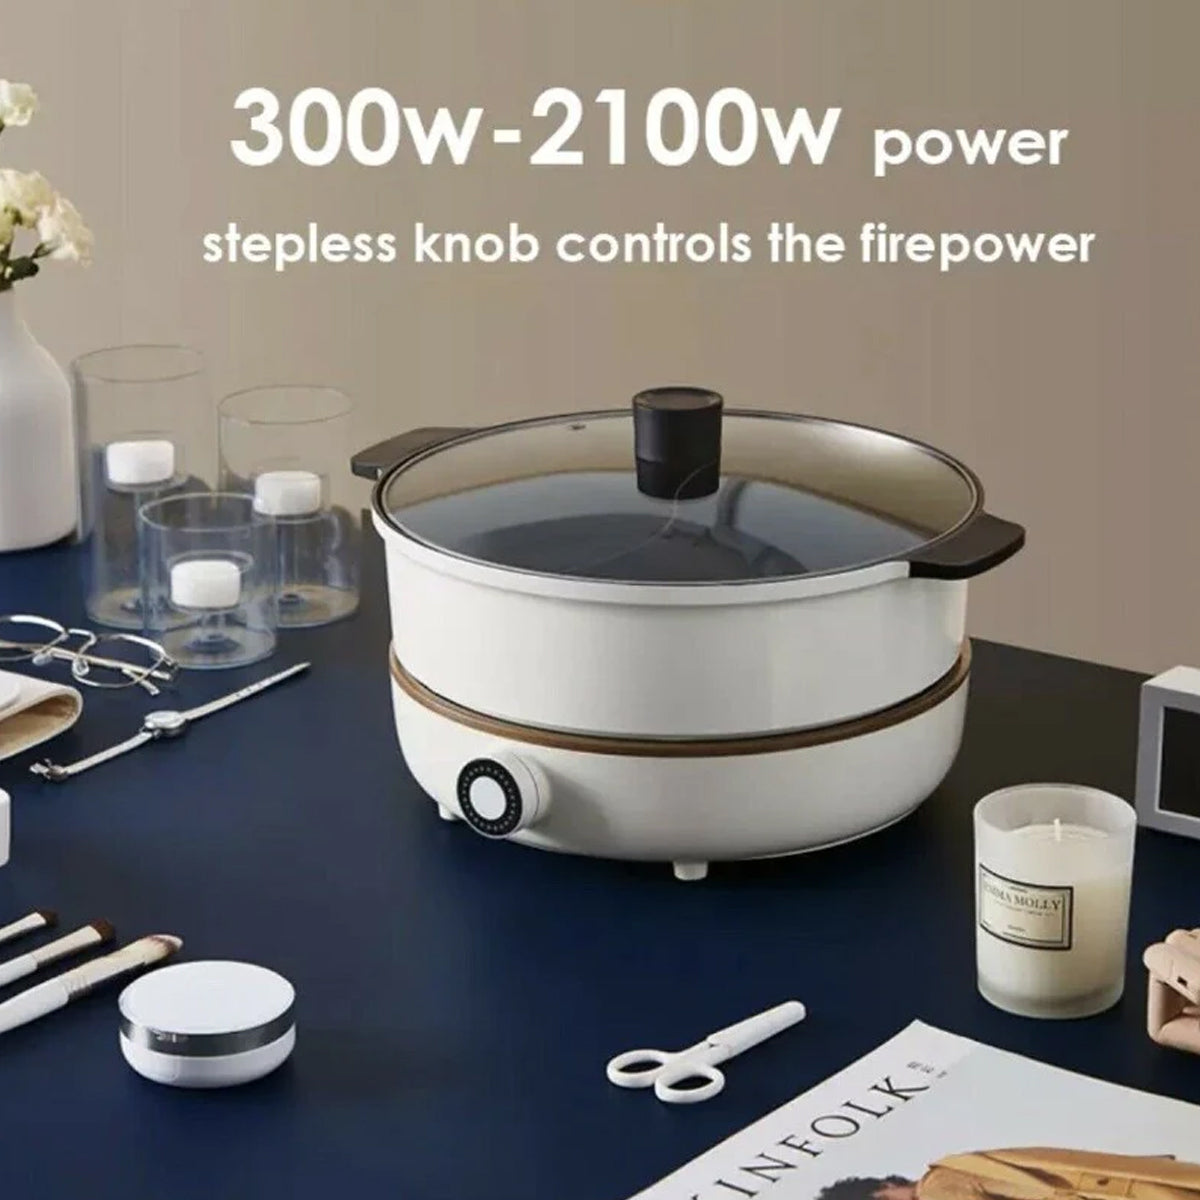 hot pot with divider - 300w-2100W power stepless knob controls the fire power